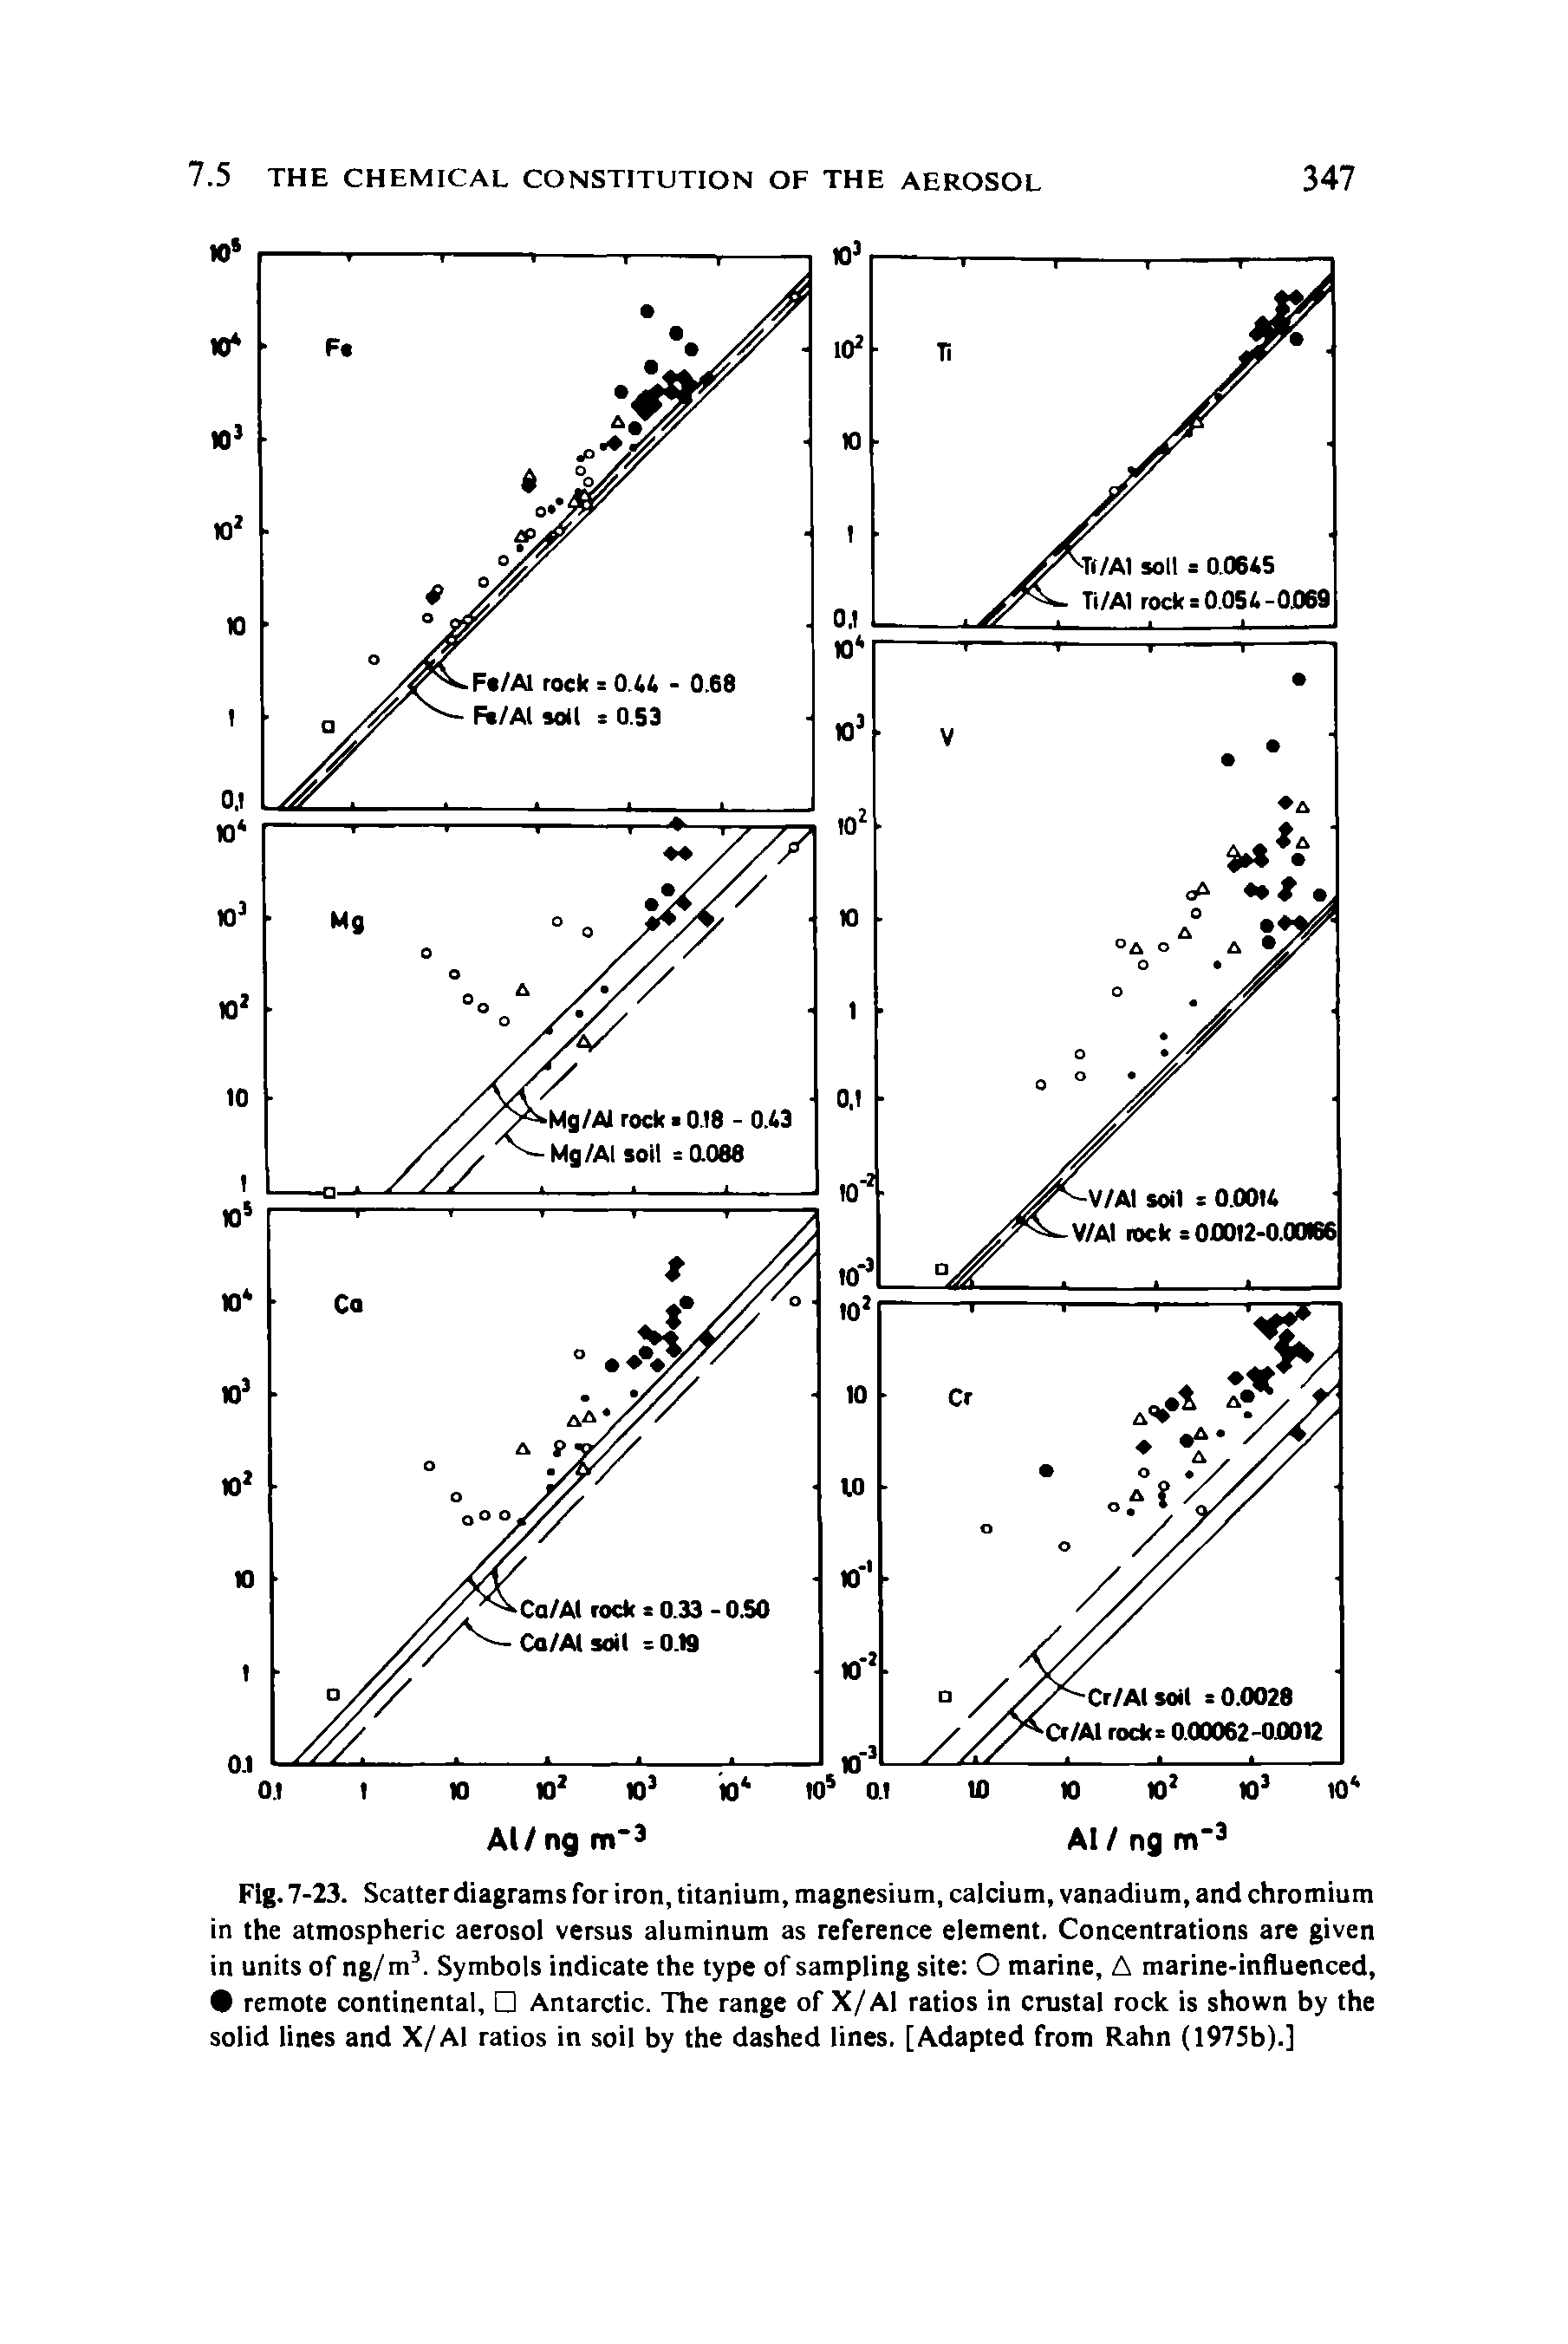 Fig. 7-23. Scatter diagrams for iron, titanium, magnesium, calcium, vanadium, and chromium in the atmospheric aerosol versus aluminum as reference element. Concentrations are given in units of ng/ m3. Symbols indicate the type of sampling site O marine, A marine-influenced, 9 remote continental, Antarctic. The range of X/Al ratios in crustal rock is shown by the solid lines and X/Al ratios in soil by the dashed lines. [Adapted from Rahn (1975b).]...